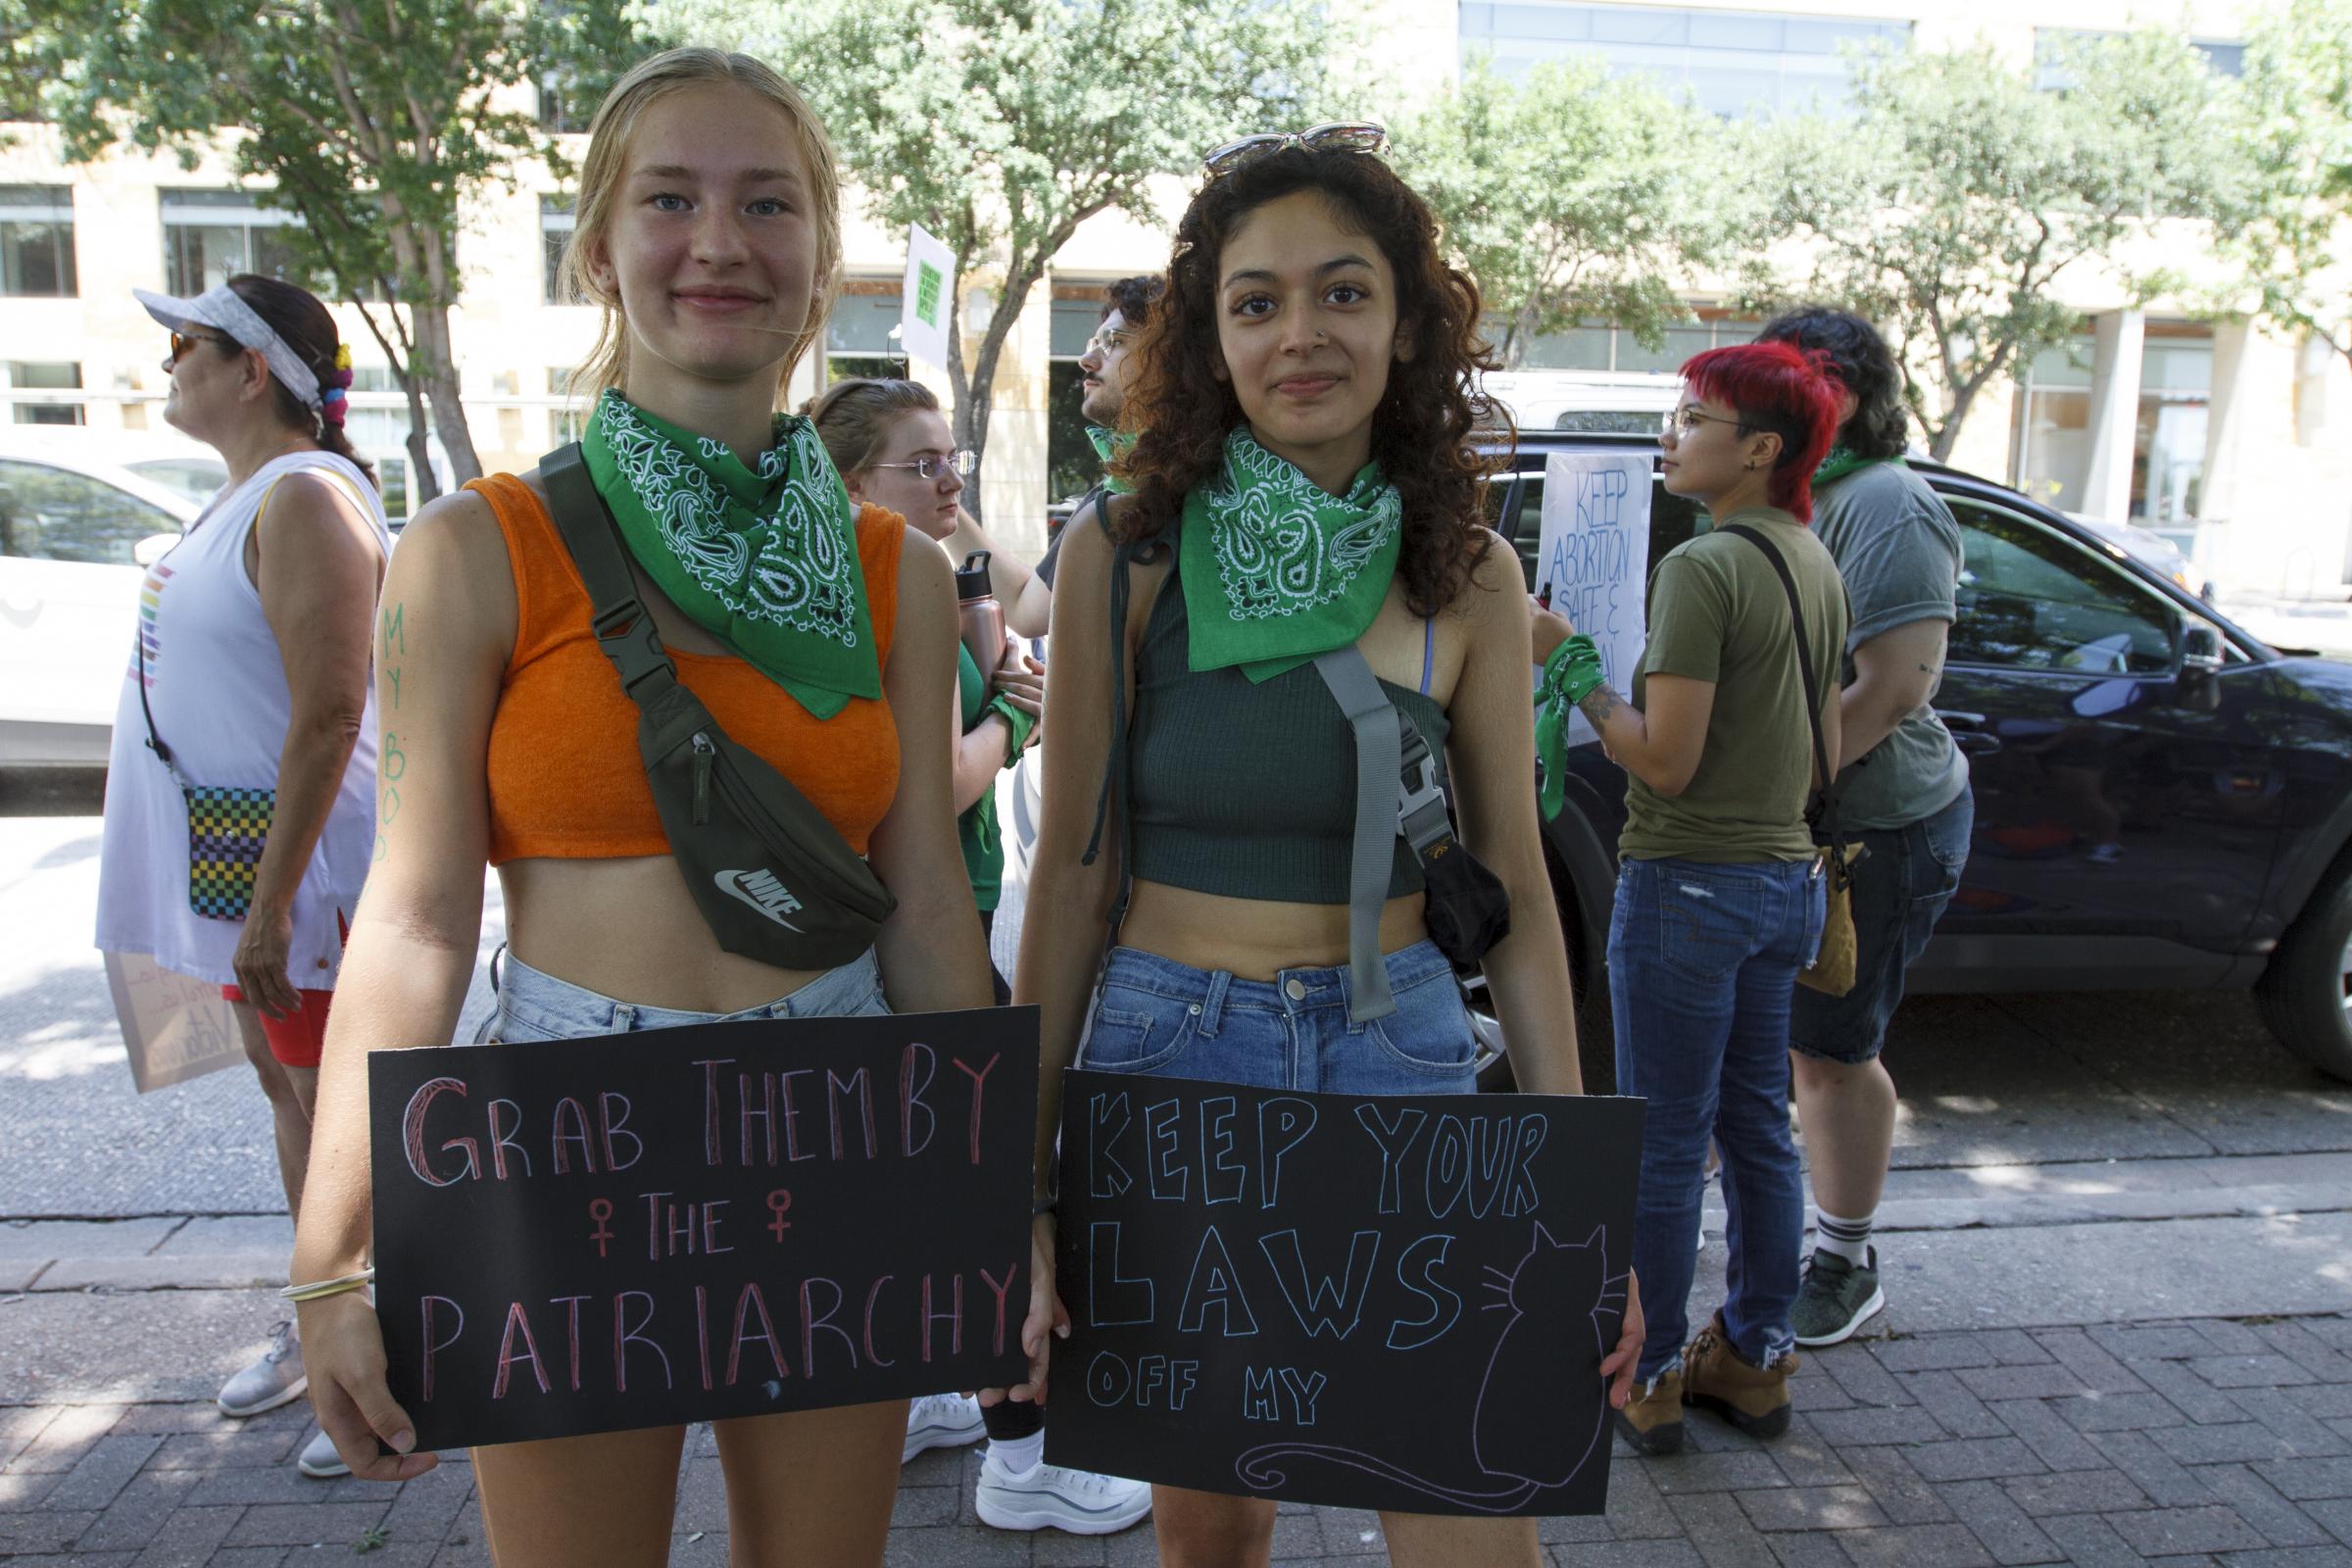 Abortion Rights Protest Austin Texas - Abortion Rights protestors gather at Buford Tower on Cesar Chavez Street in Austin Texas to...